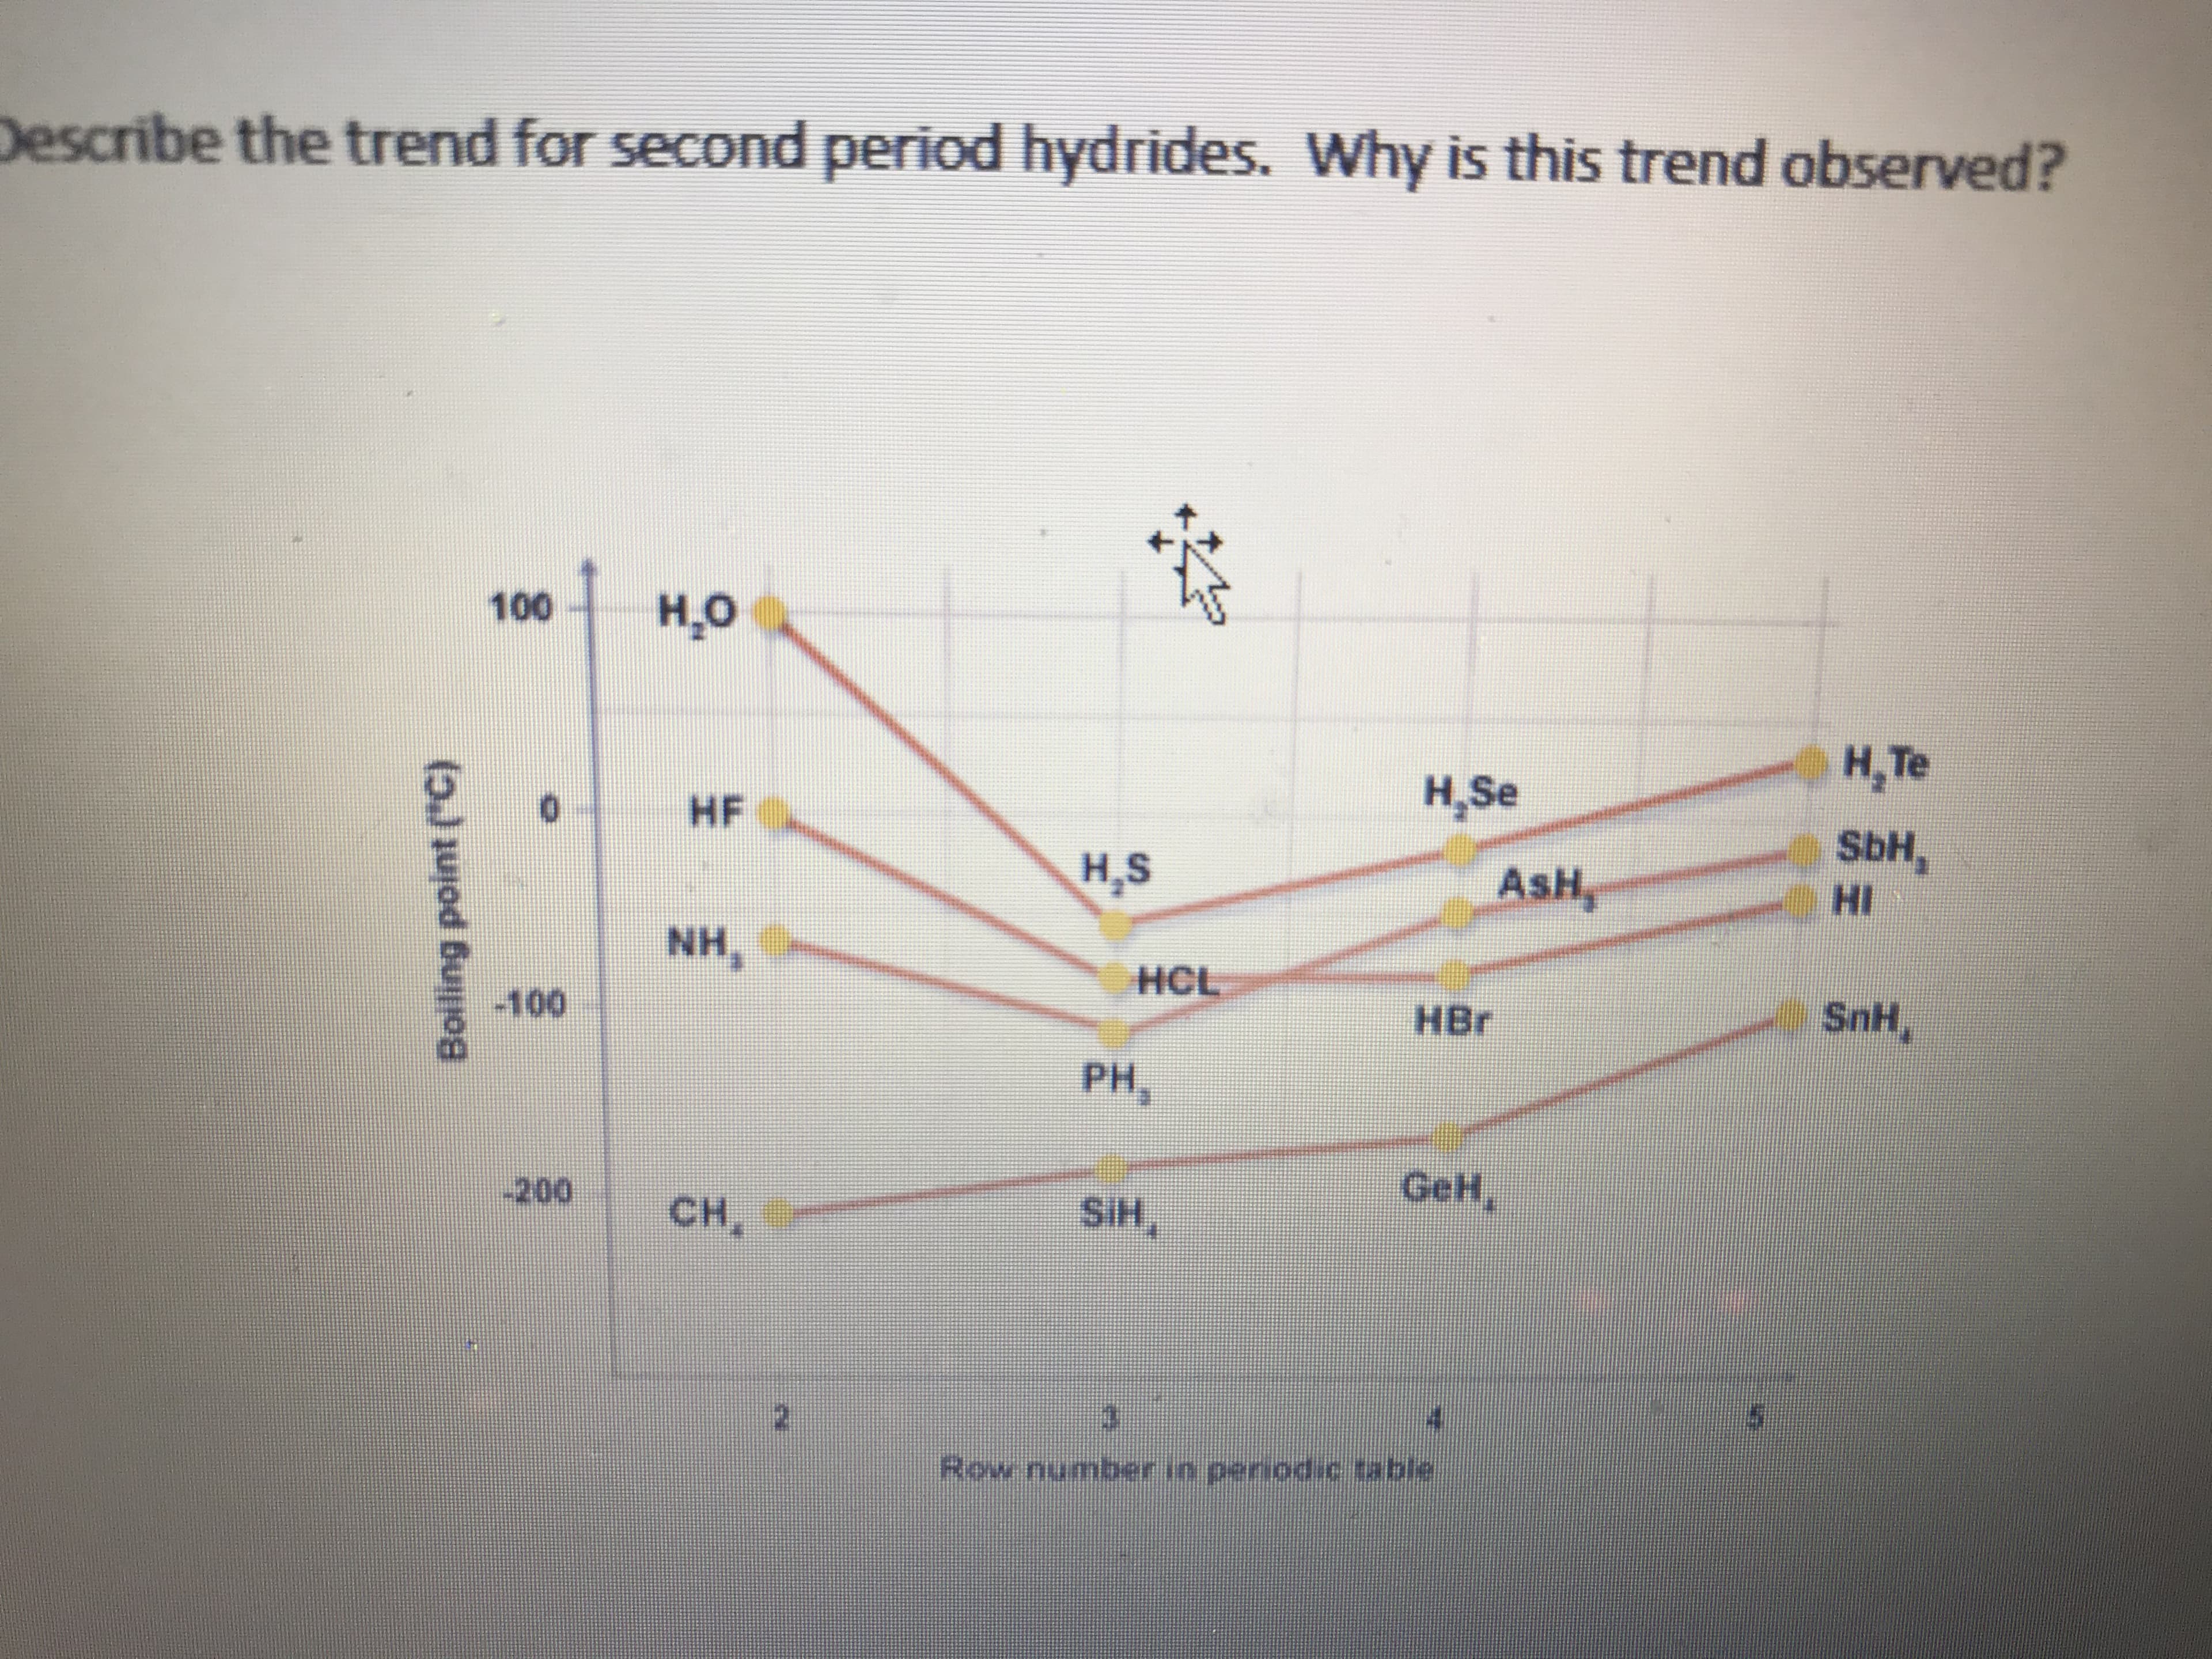 Describe the trend for second period hydrides. Why is this trend observed?
н.о
100
Н, Те
H,Se
SbH,
HI
HF
0
AsH
H.S
NH,
HCL
SnH,
HBr
-100
PH,
GeH,
-200
SH,
CH,
5
3
2
Row number in periodic table
Boiling point ("C)
